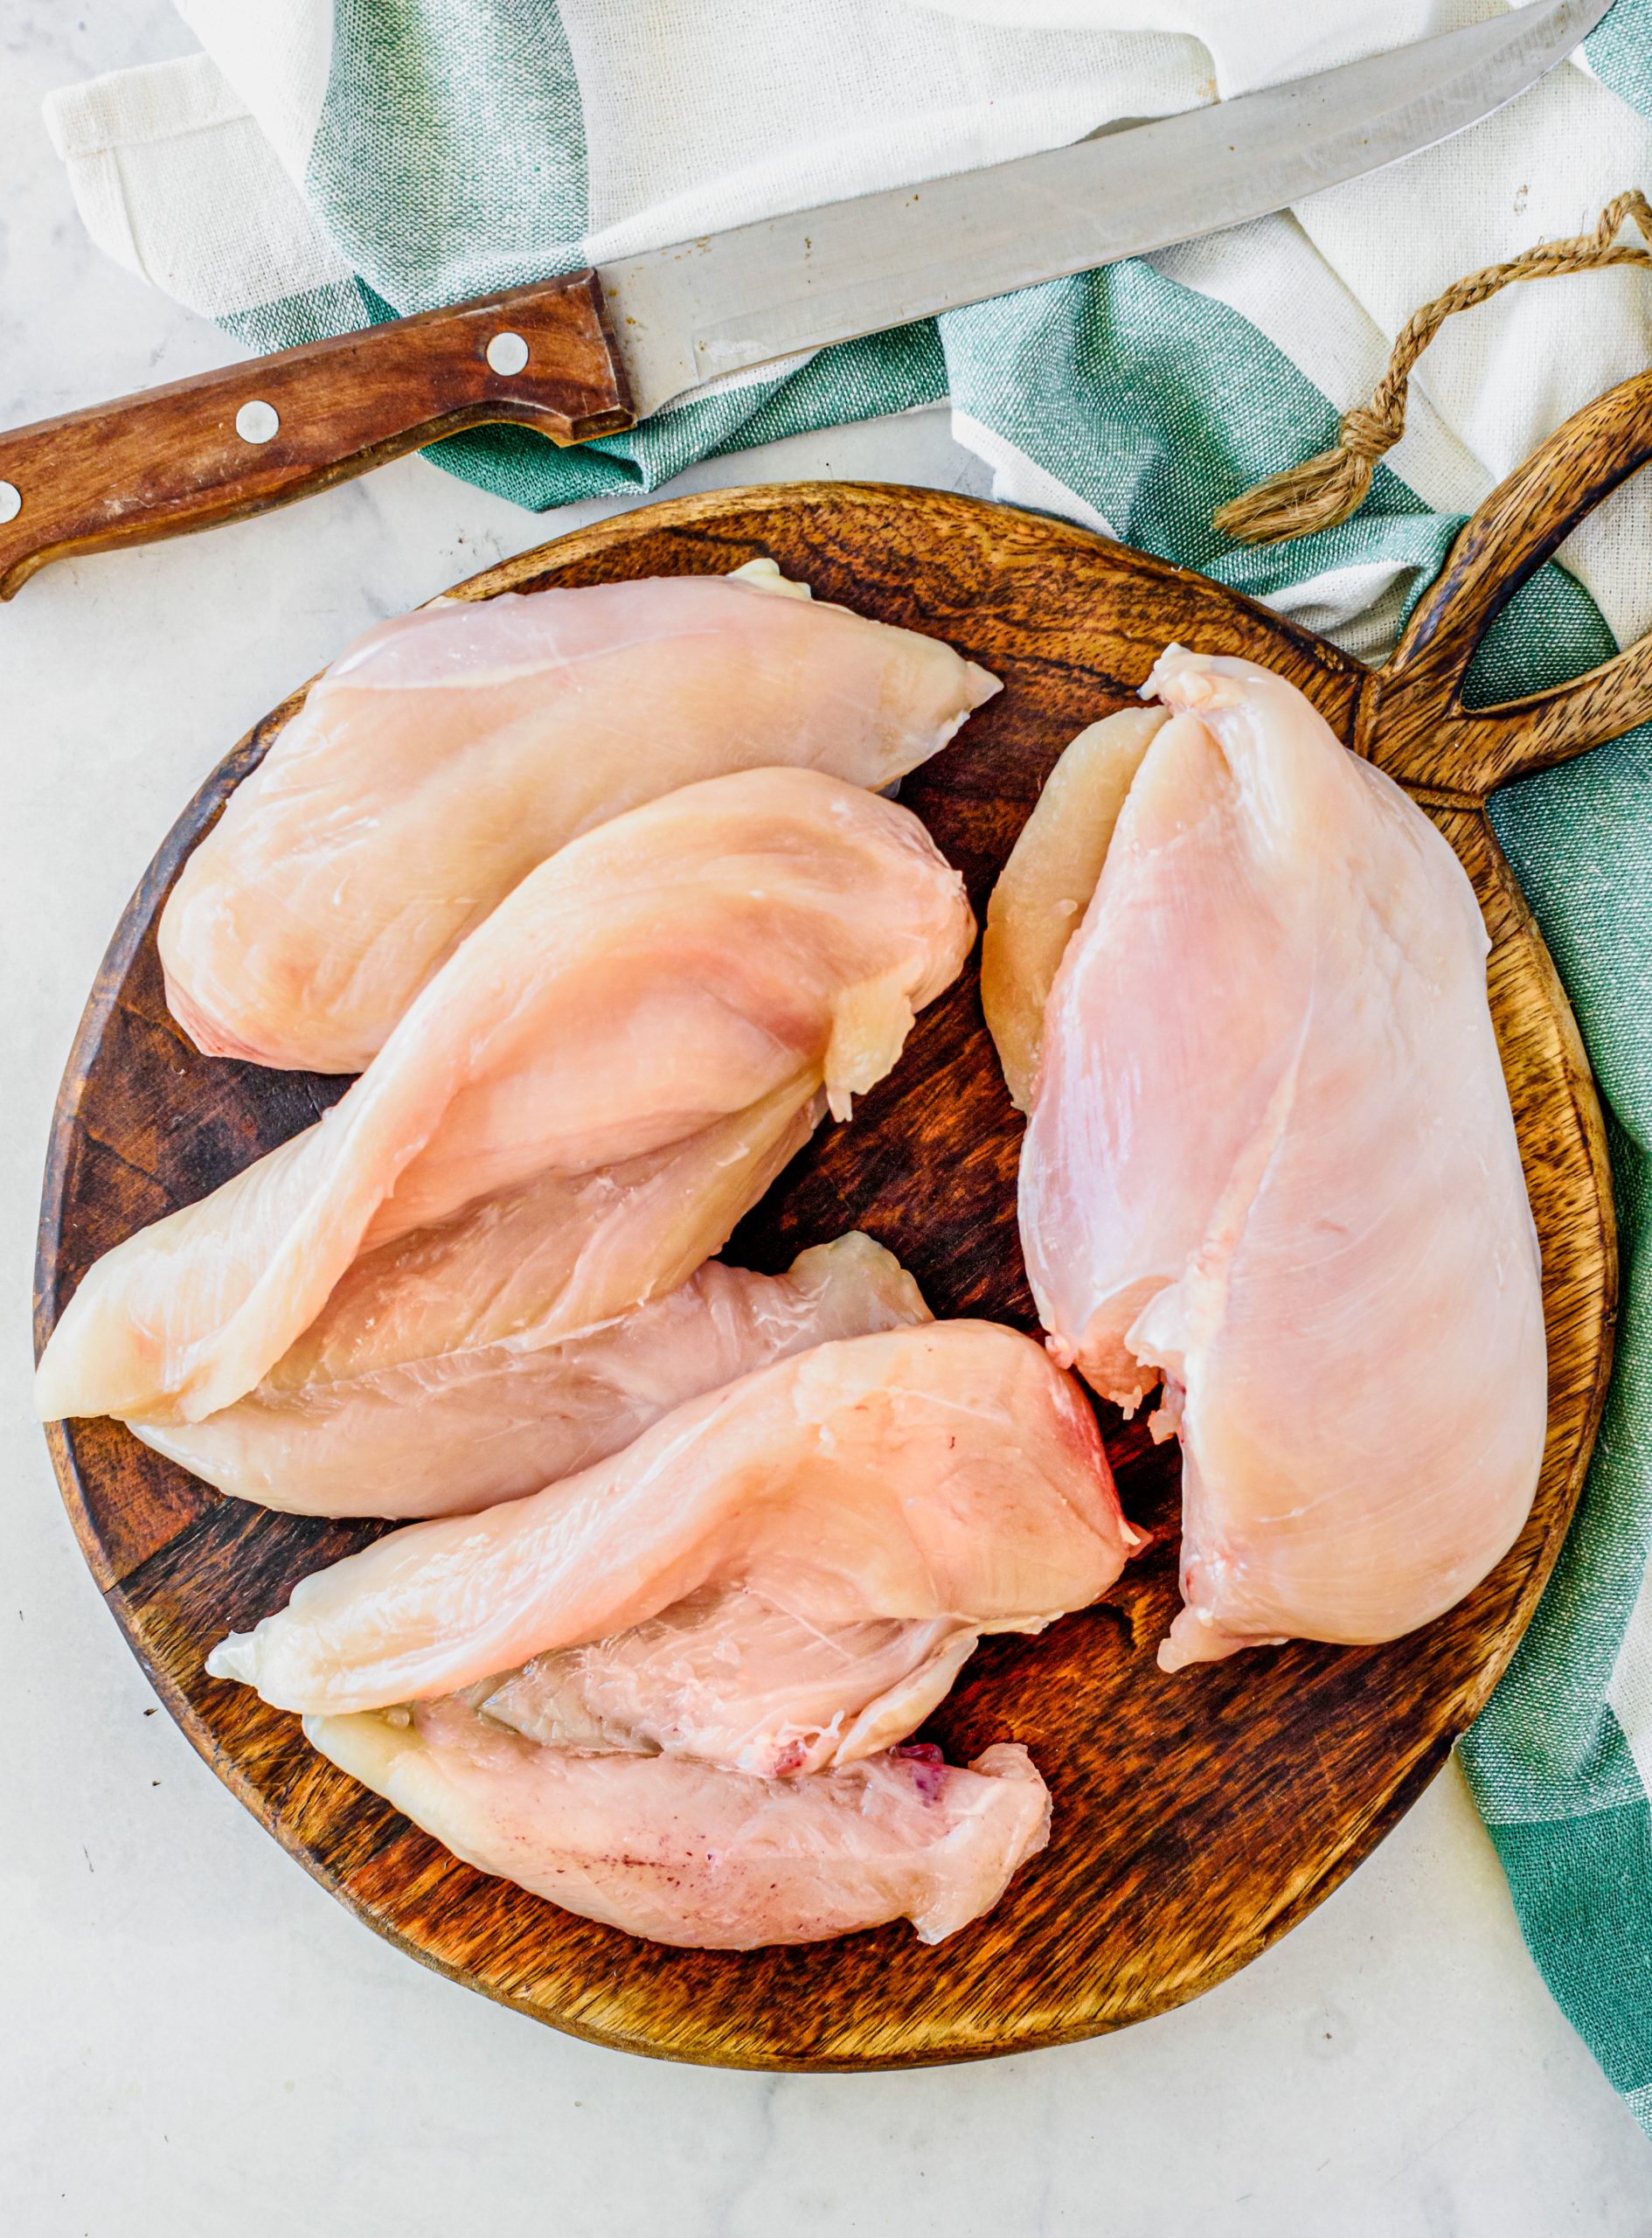 Slice a pocket into the side of each chicken breast.